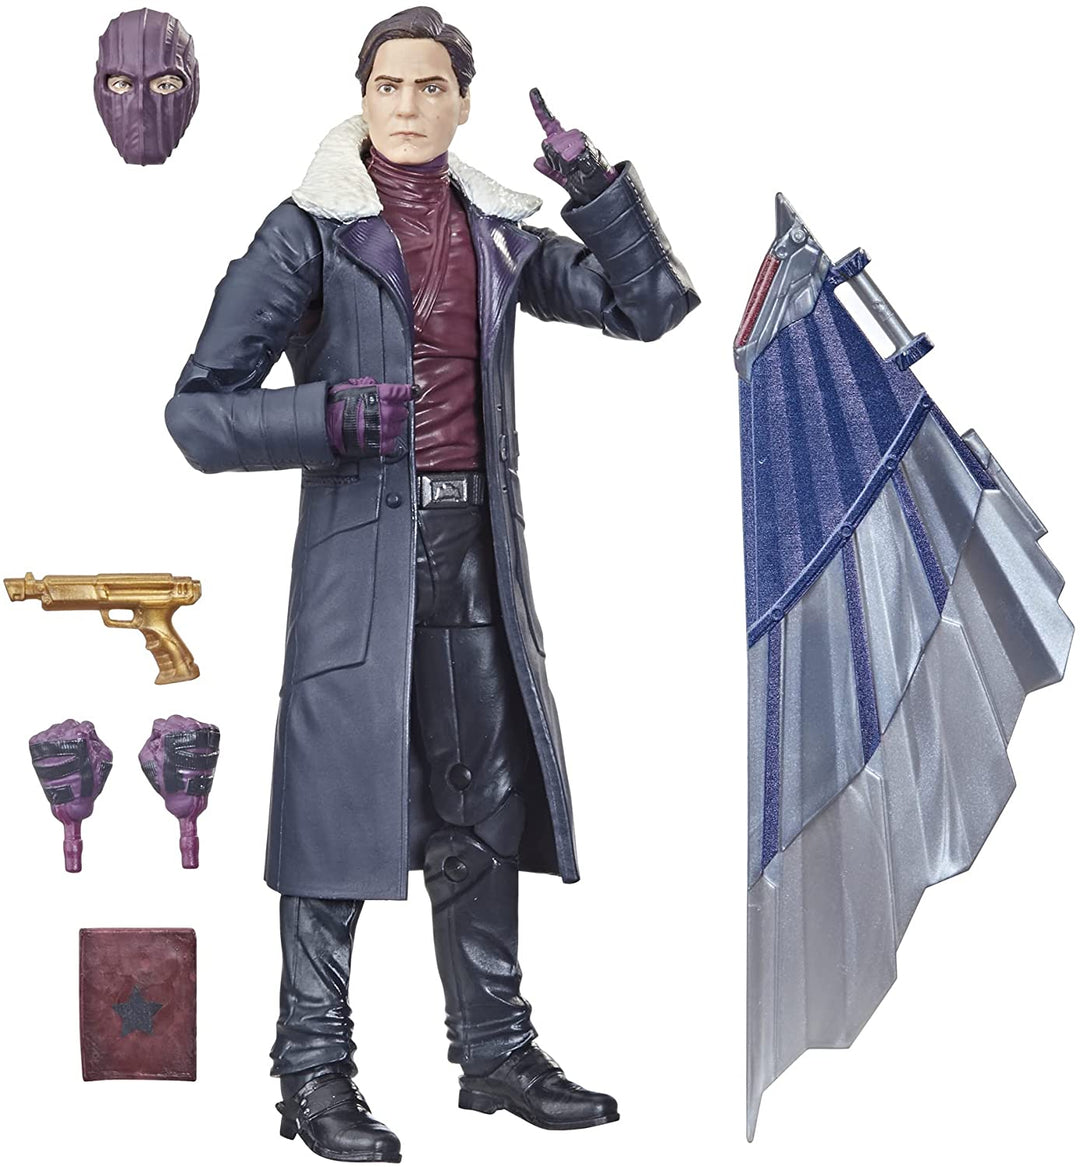 Hasbro Marvel Avengers Legends Series Avengers 15-cm Action Figure Toy Baron Zemo, Premium Design and 5 Accessories, For Kids Age 4 And Up multicolor